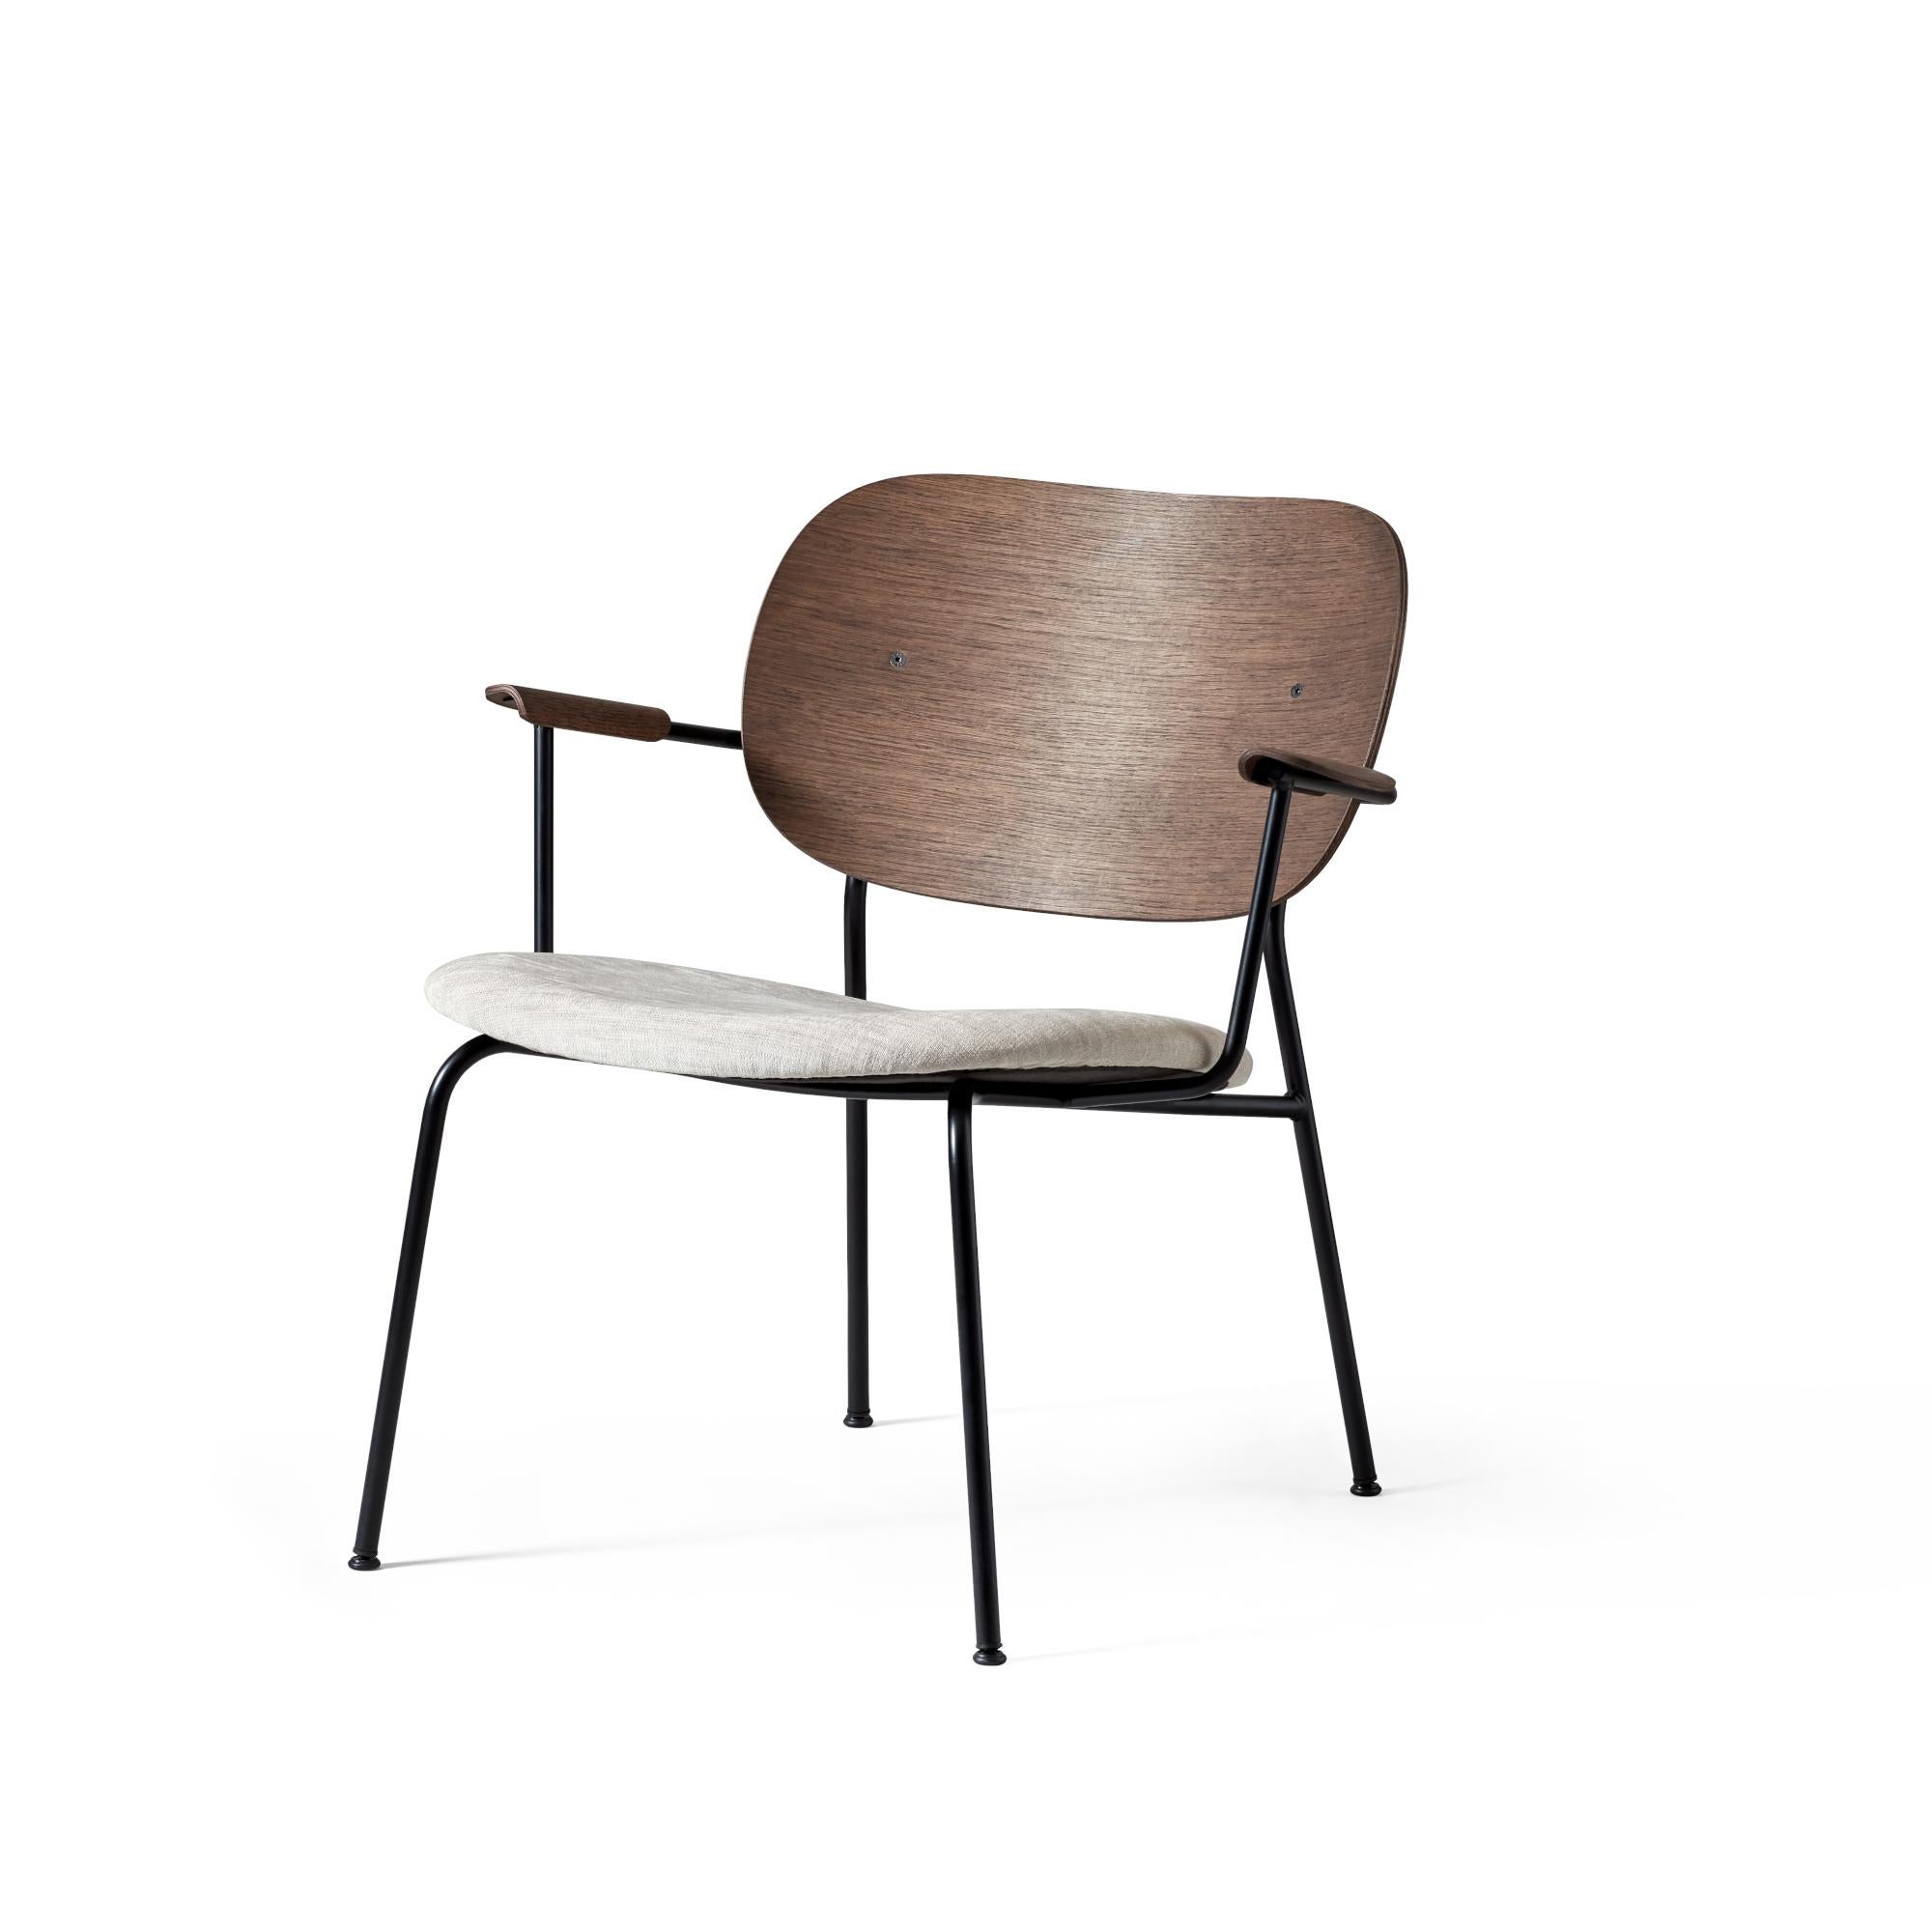 Together, mutually, in common: The words that define the prefix ‘co-’ are at the heart of our new Co Chair design. Conceived in collaboration with The Office Group and Norm Architects, the multifunctional chair adapts to a wide range of needs and